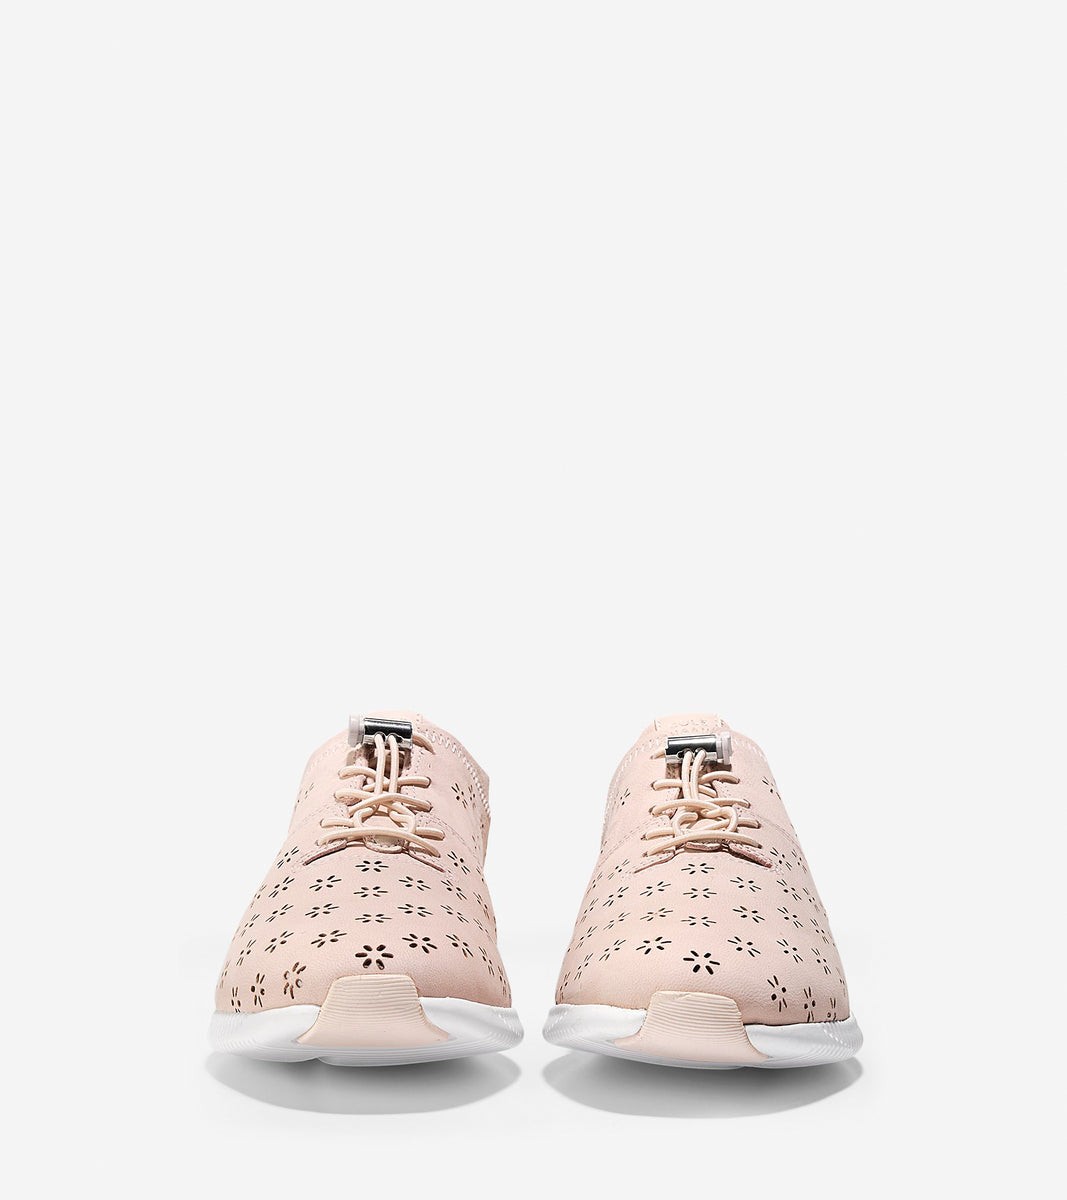 ColeHaan-StudiøGrand Pack-and-Go Sneaker-w10577-Peach Blush Perforated-optic White